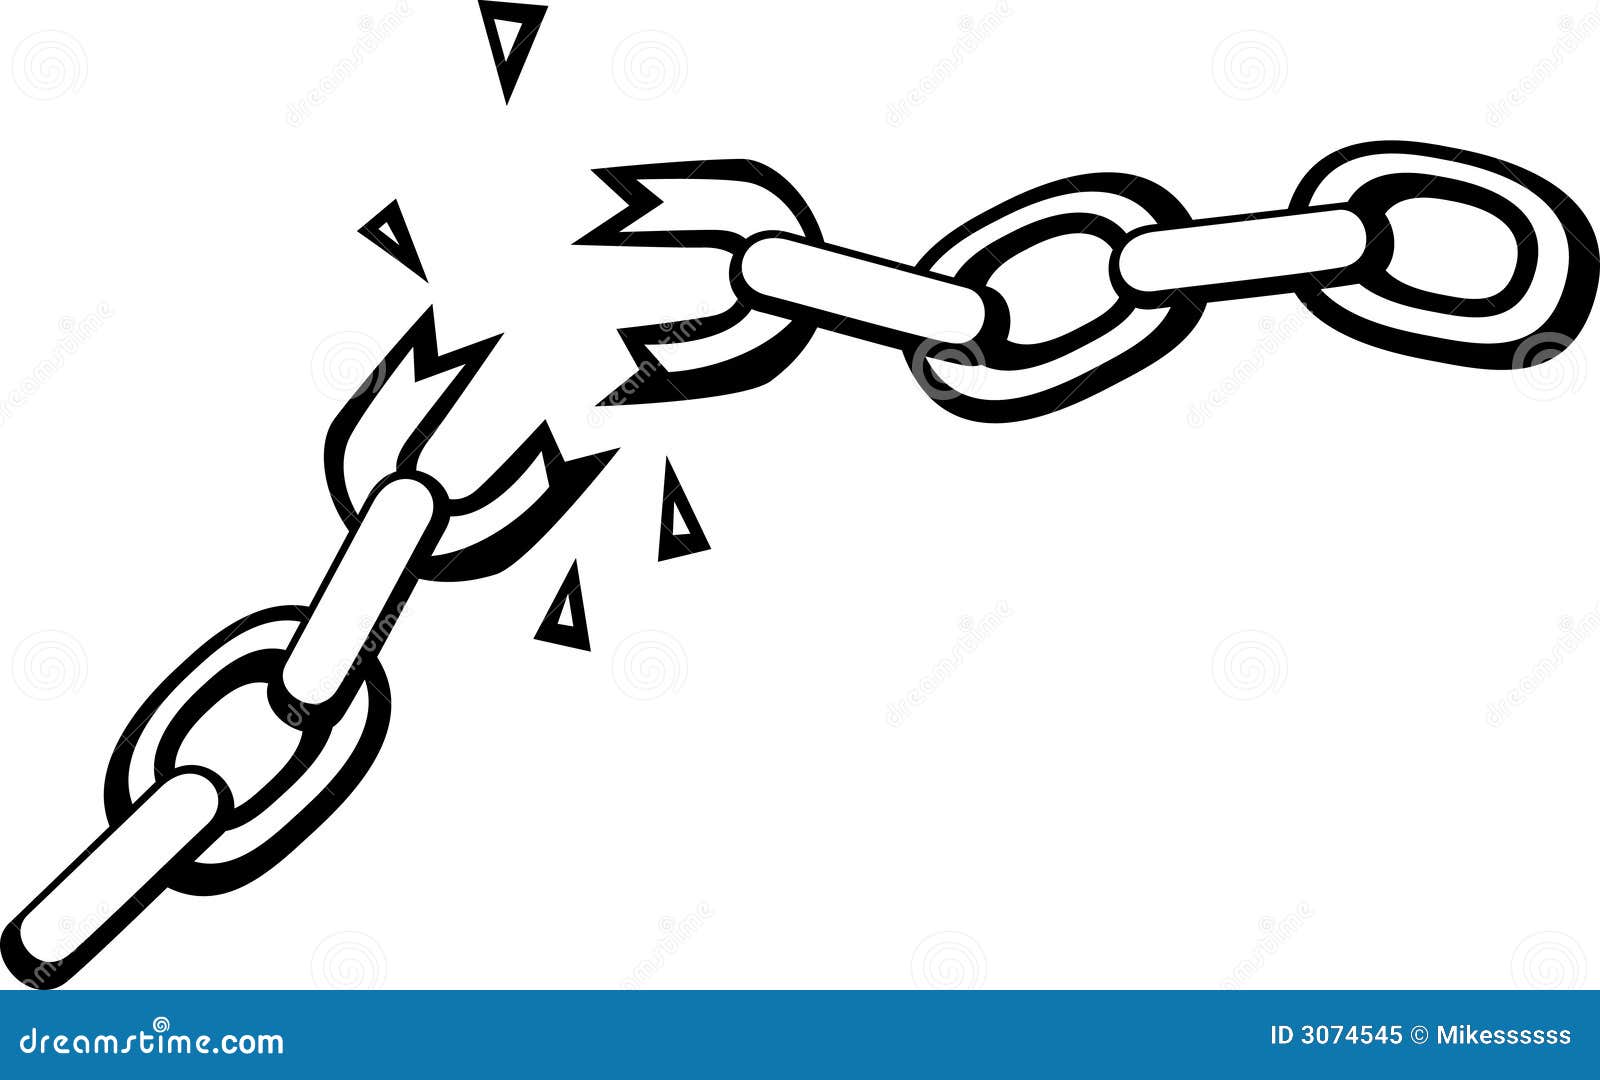 Tools Vector Clipart Of Chains